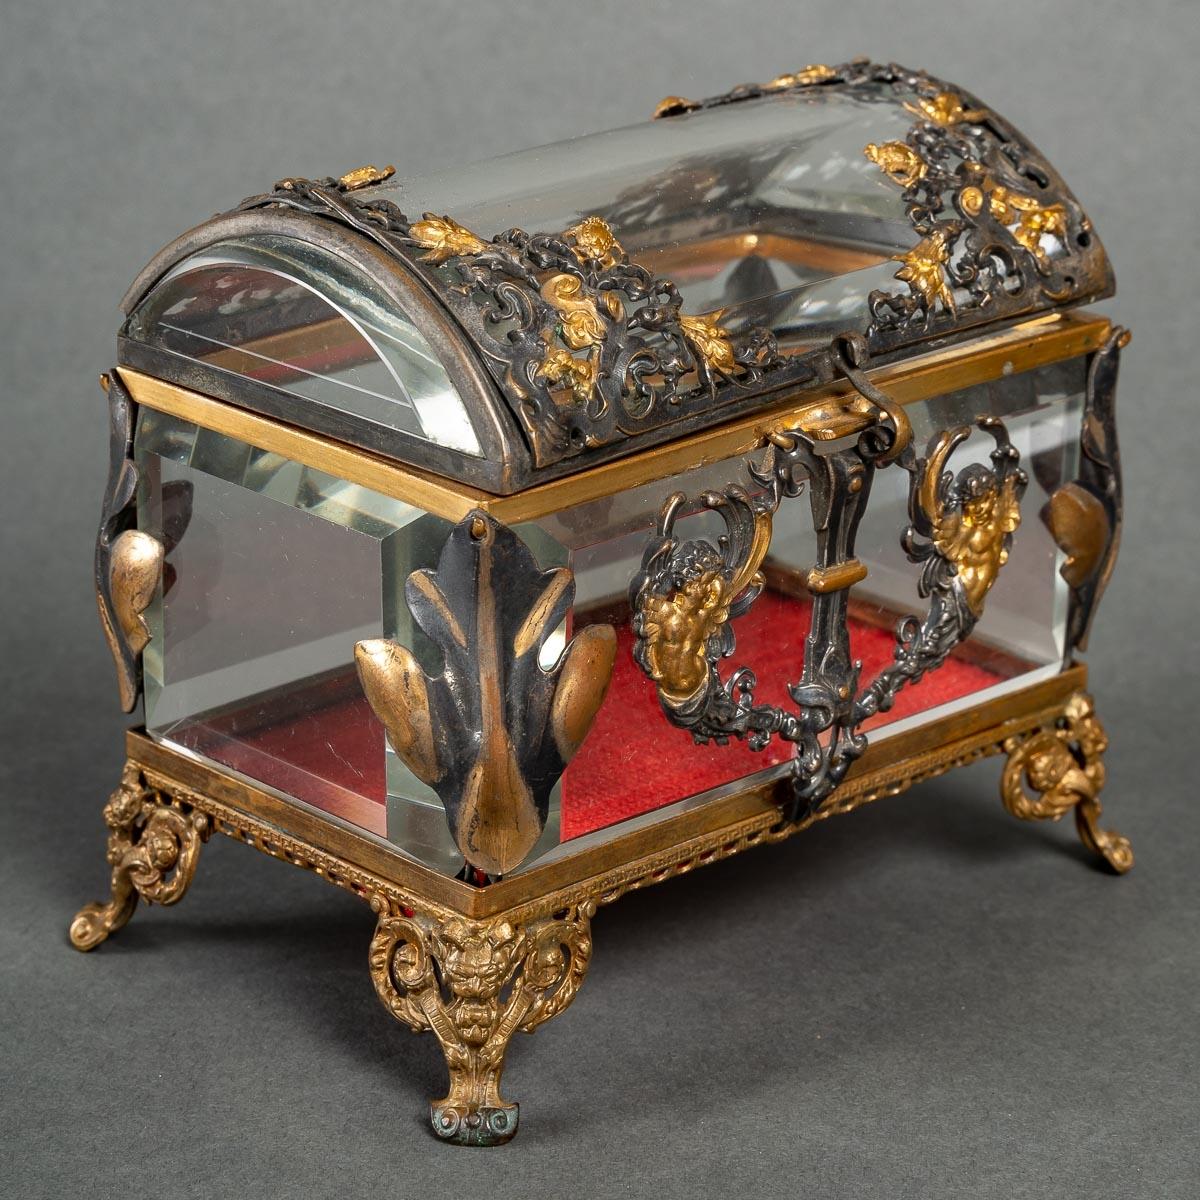 Beautiful crystal jewelry box, mounted in silver and gilded bronze.

Crystal jewelry box, mounted in gilt bronze and silver, Napoleon III period, 19th century.

Dimensions: H: 11,5cm, W: 12cm, D: 9cm.